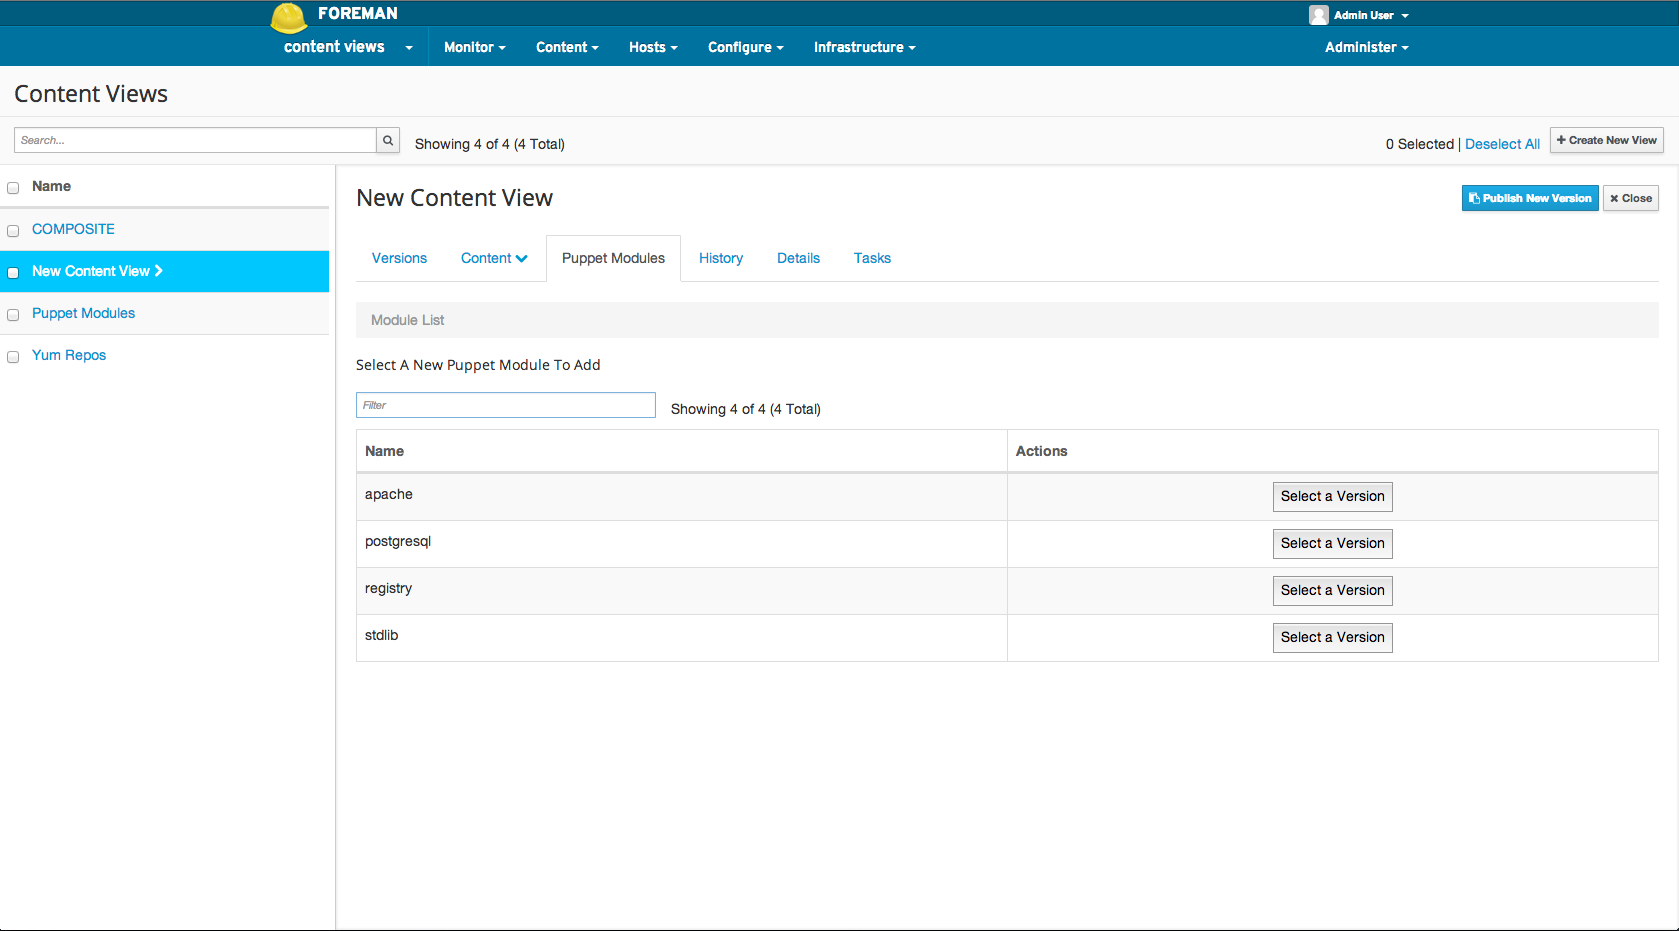 Adding a puppet module to a Content View 2